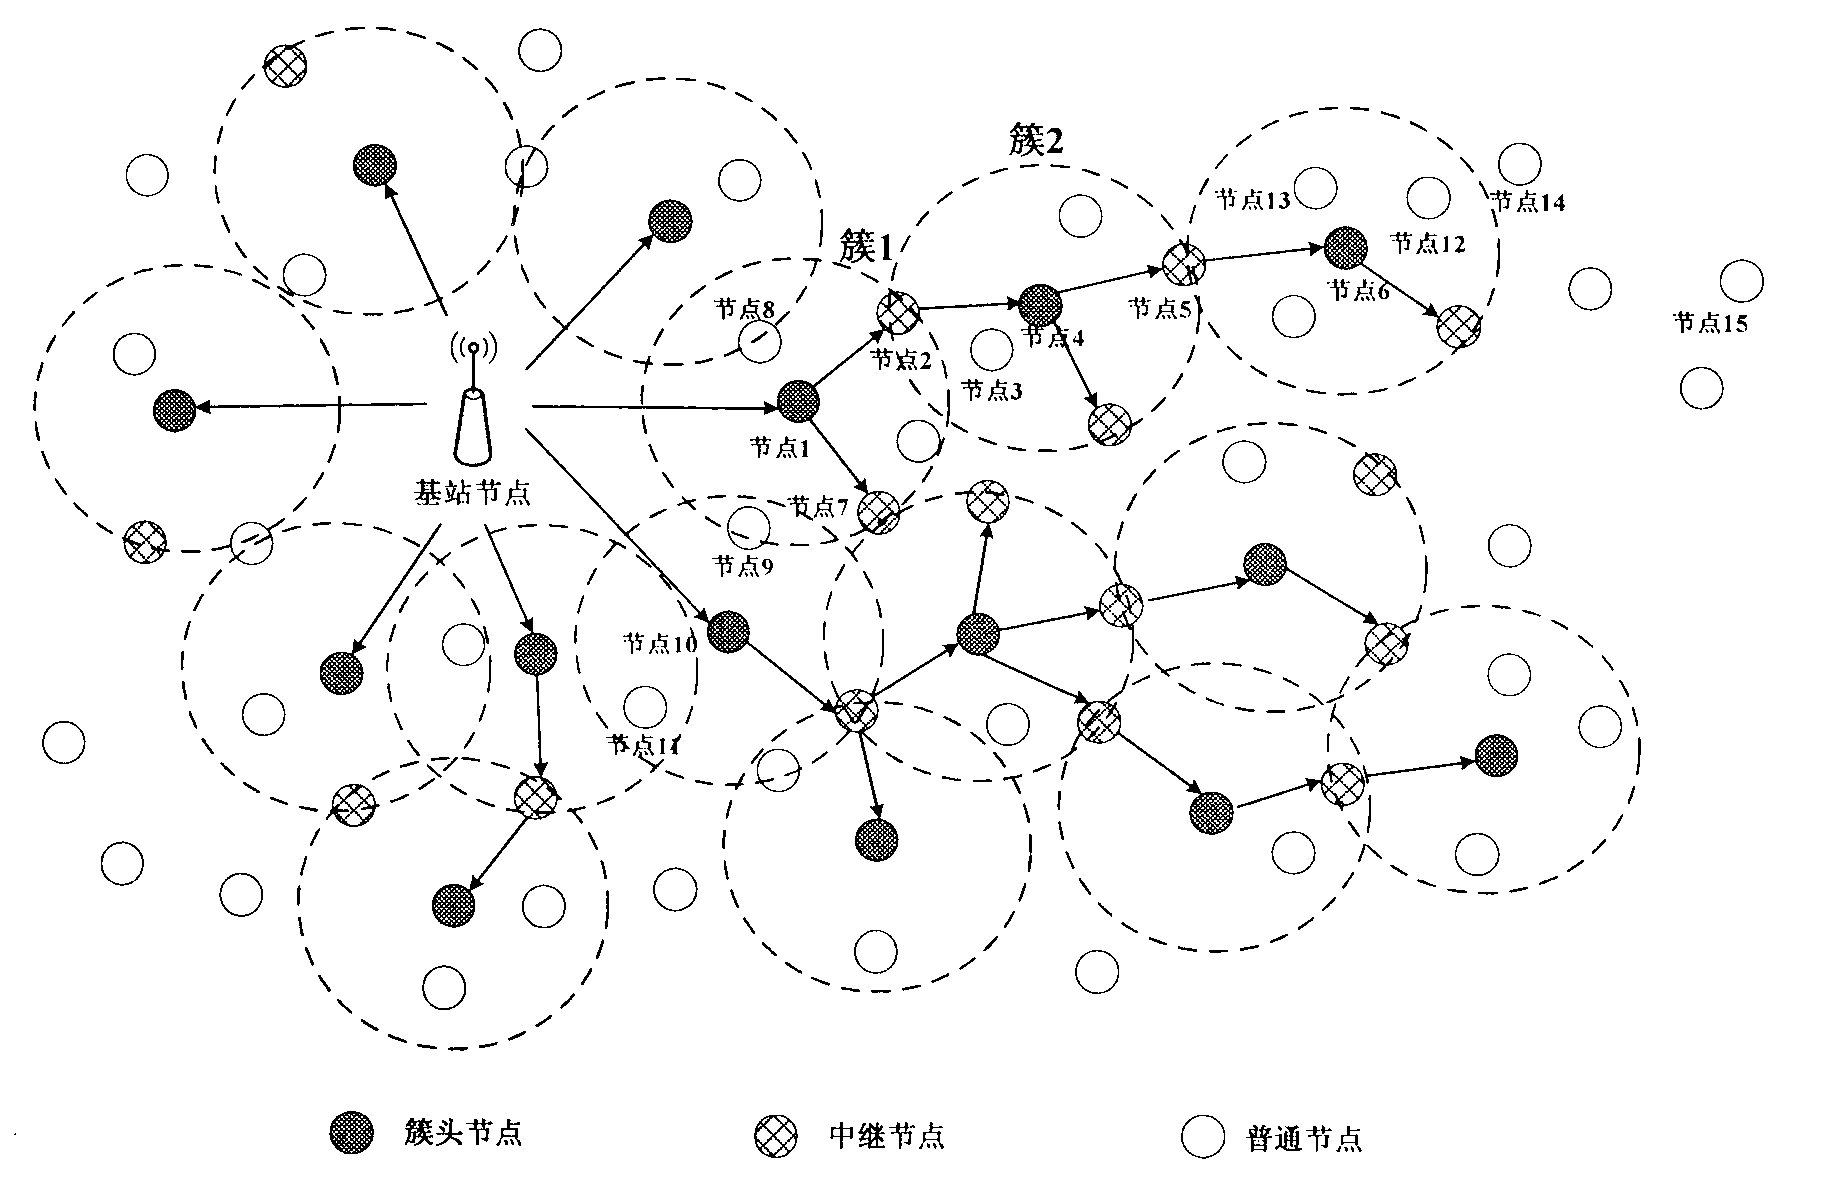 Method for broadcast authentication of wireless sensor network based on automaton and game of life